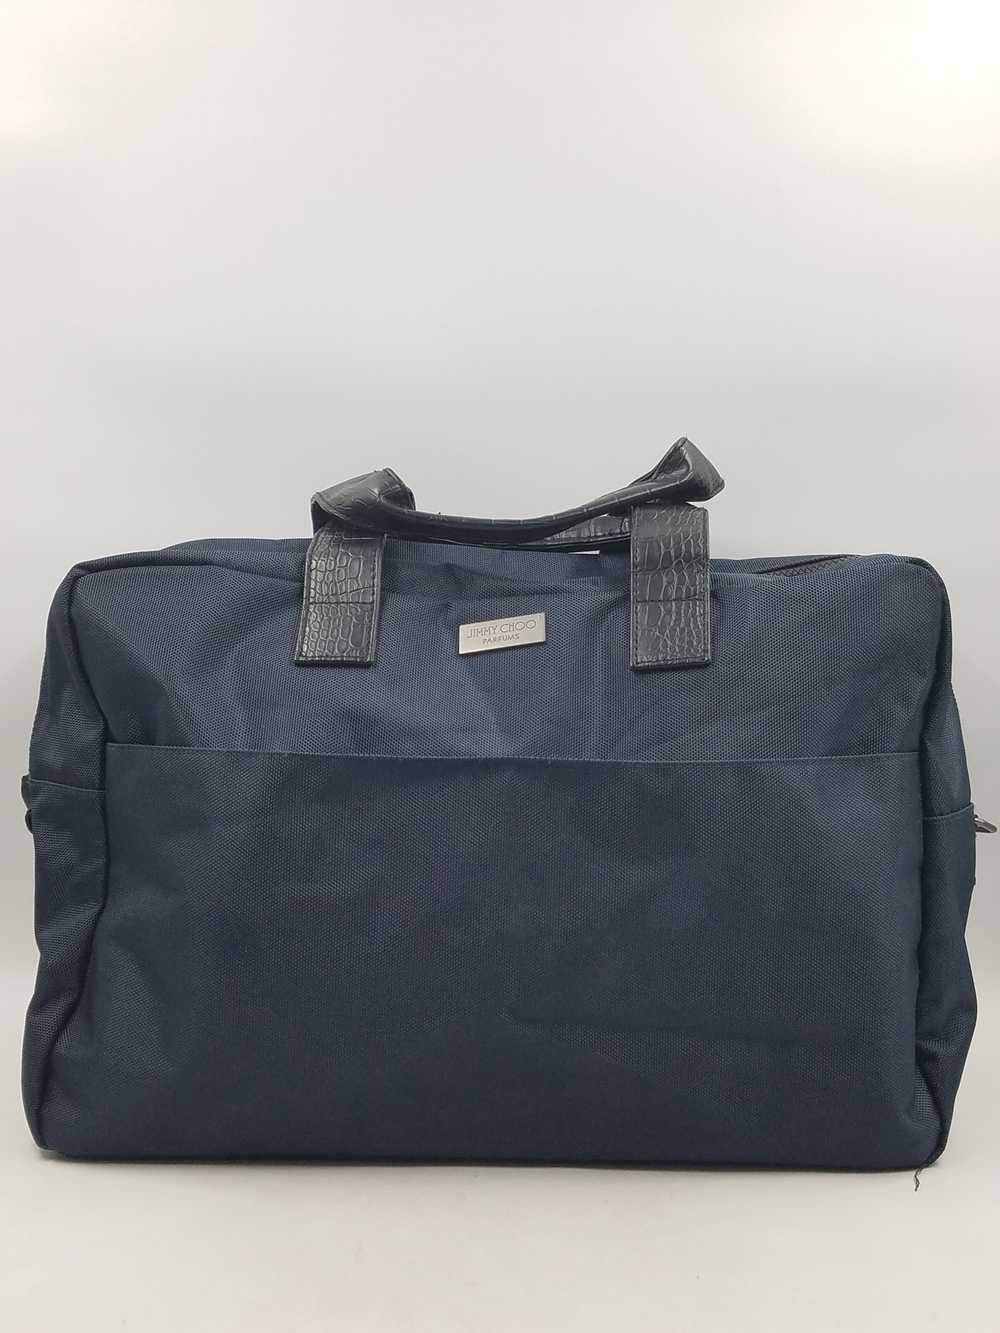 Authentic Jimmy Choo Parfums Navy Duffle Bag - image 1